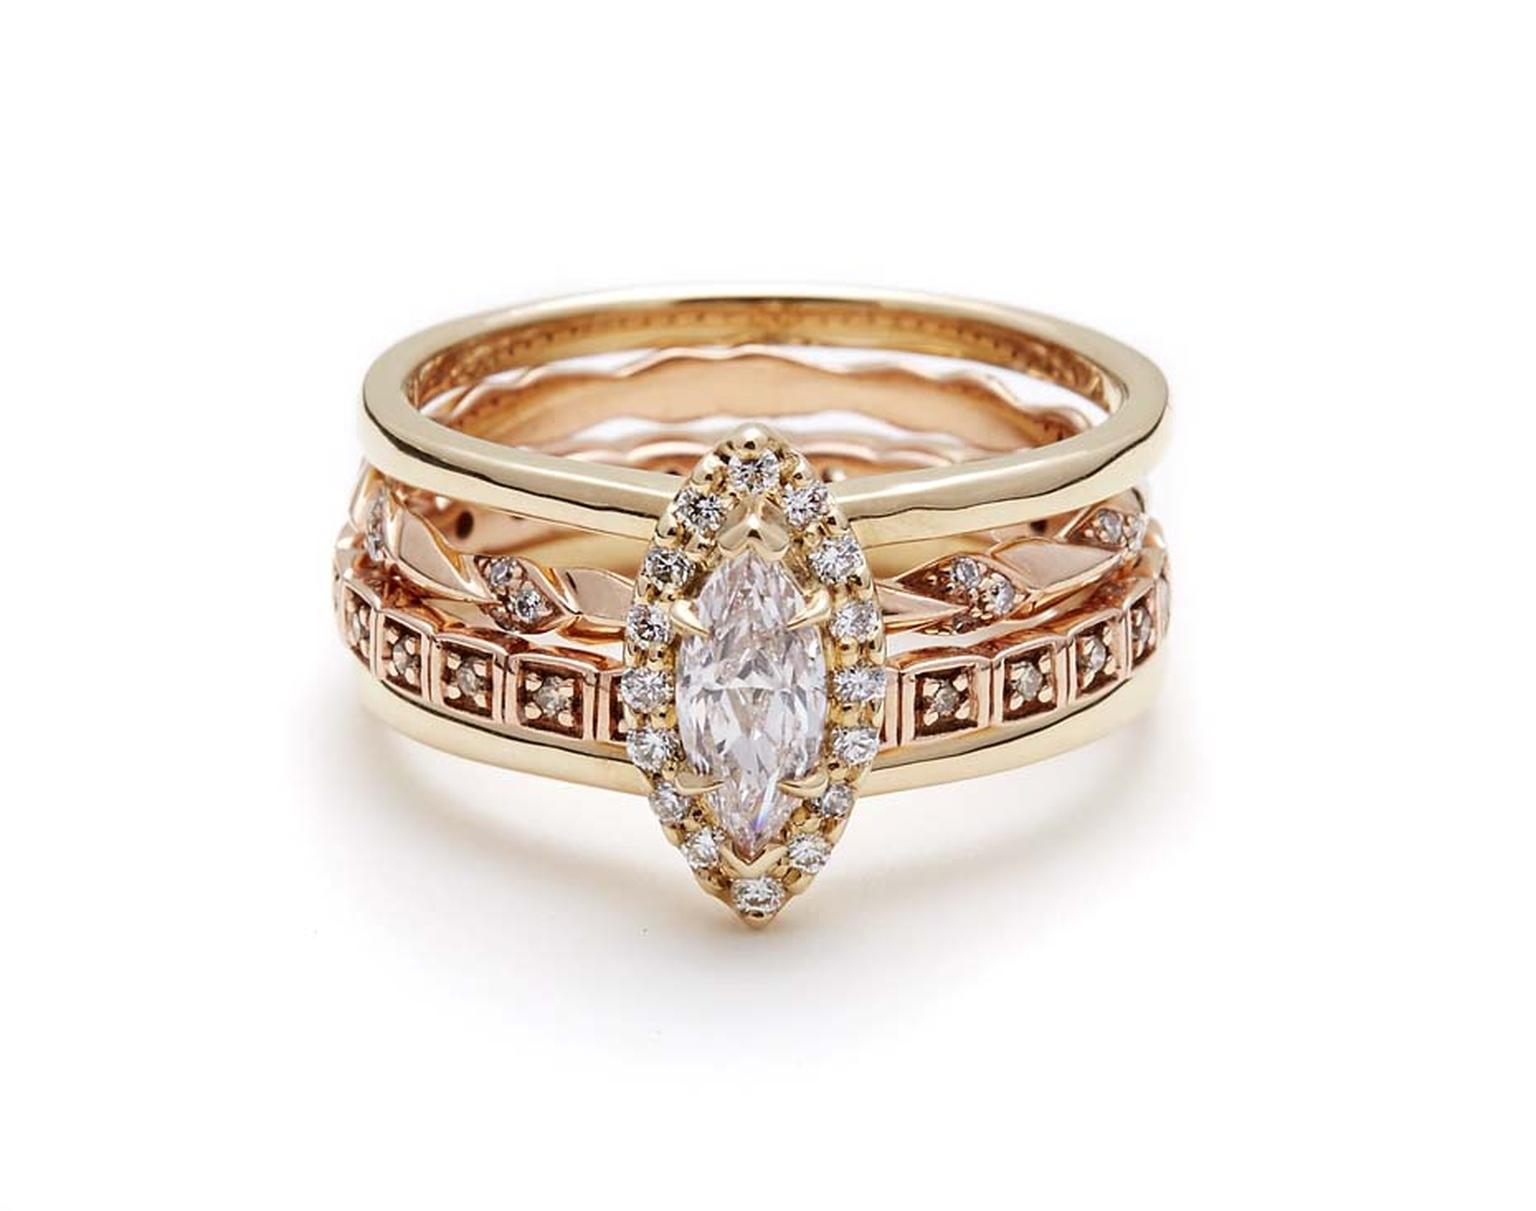 Anna Sheffield Attelage Marquise Diamond Bridal Set with a central marquise-cut diamond encircled with prong-set diamonds on a double-banded harness ring in rose gold